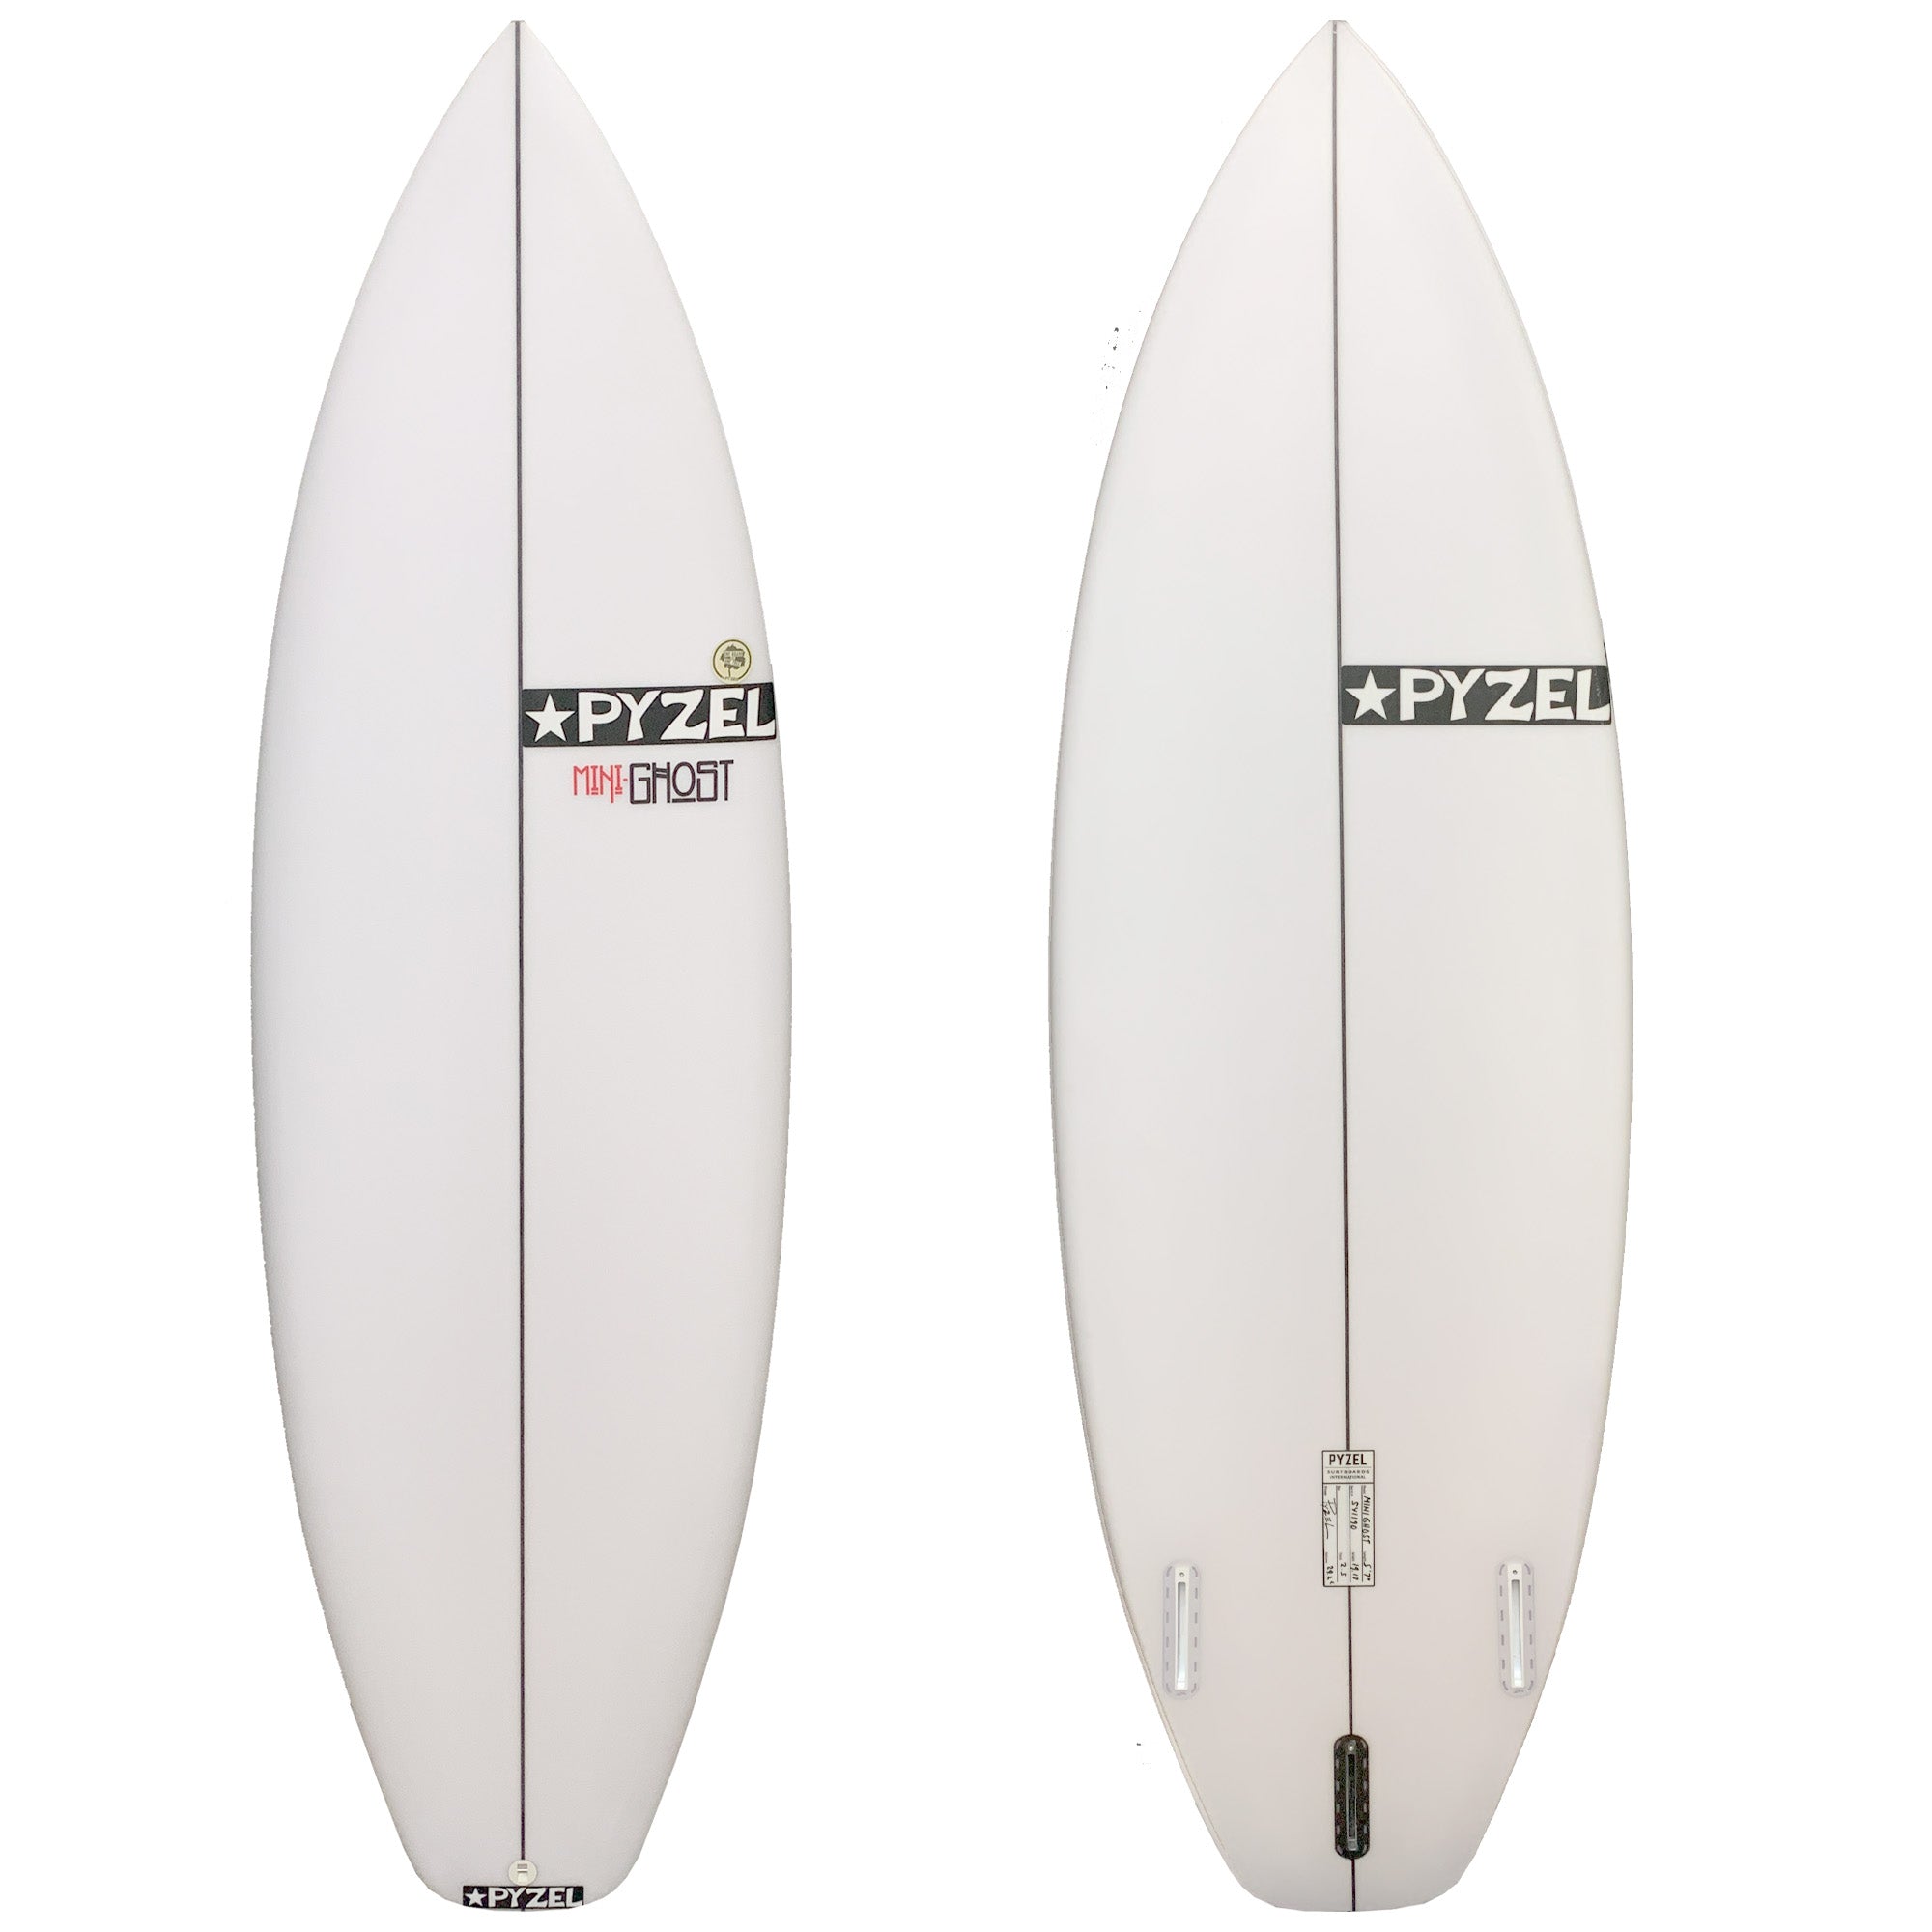 Pyzel Mini Ghost Squash Surfboard - Futures